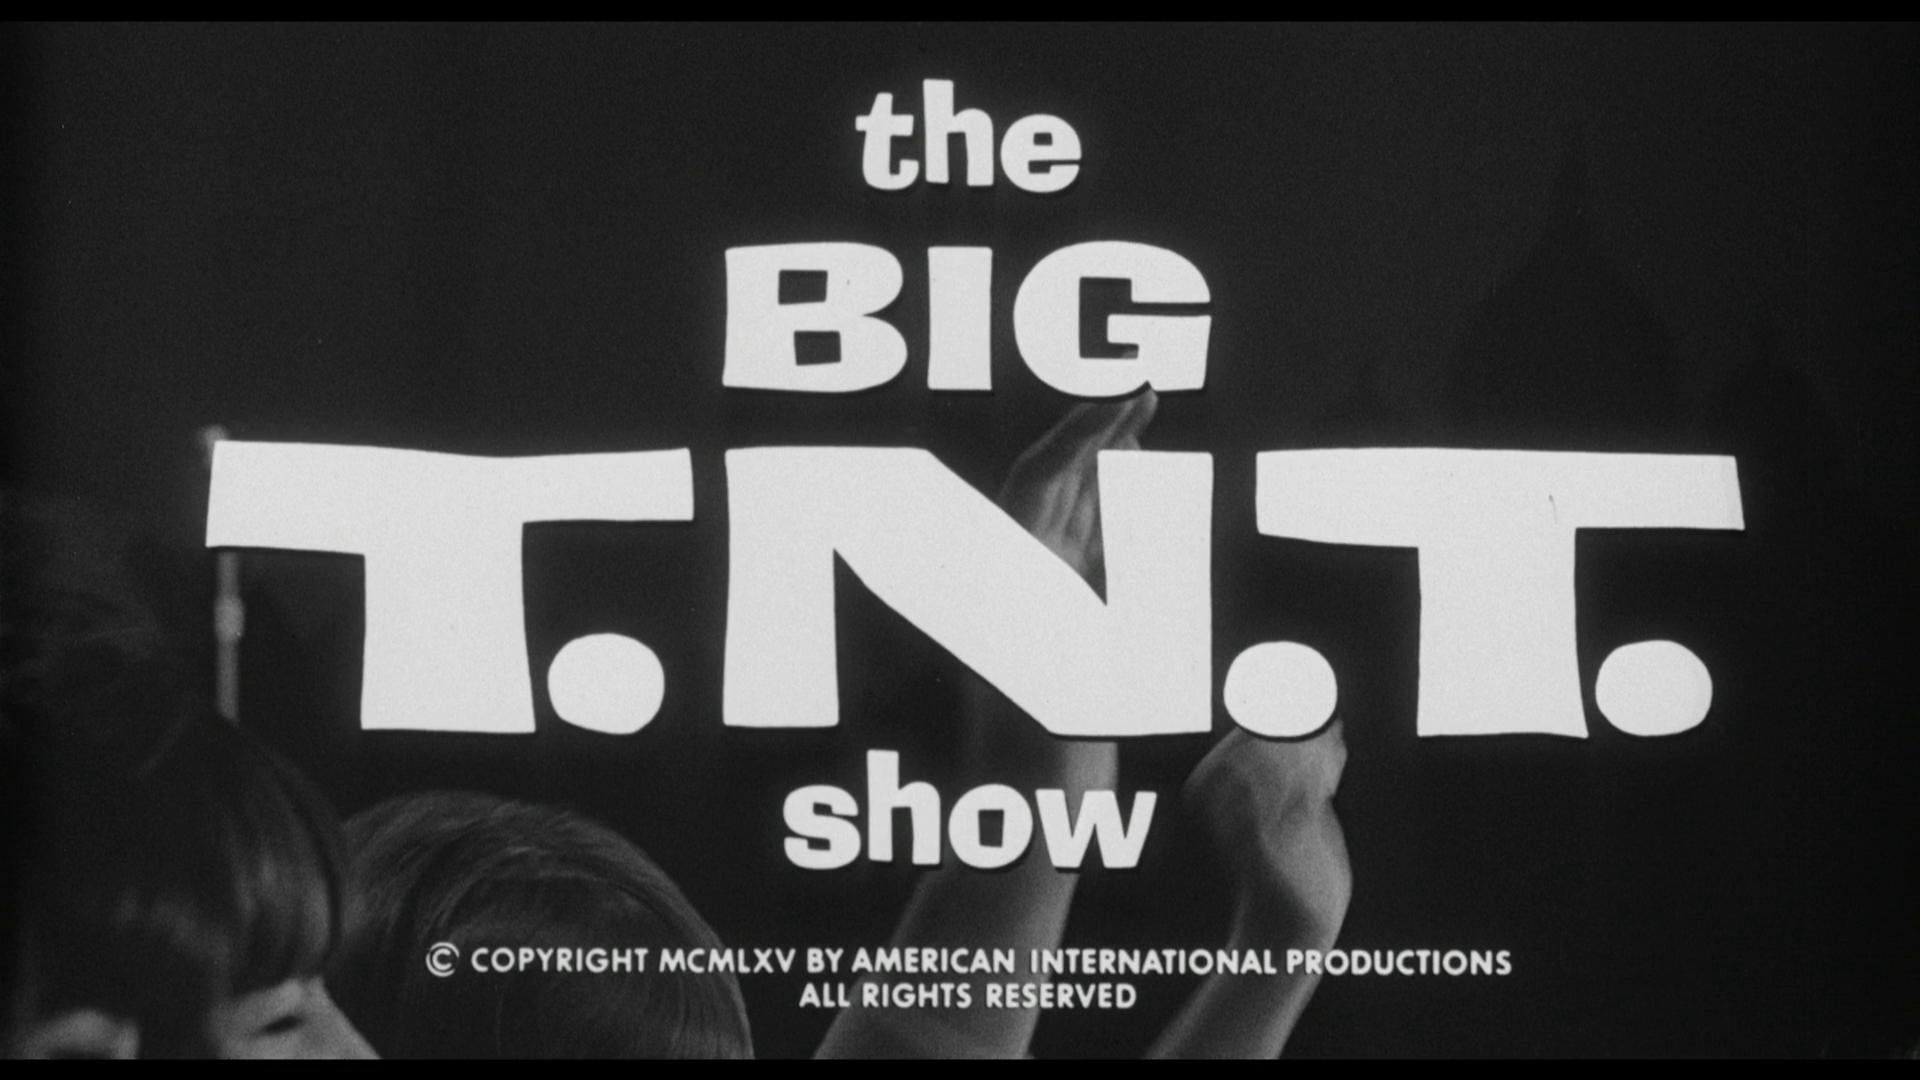 The Big T.N.T. Show background